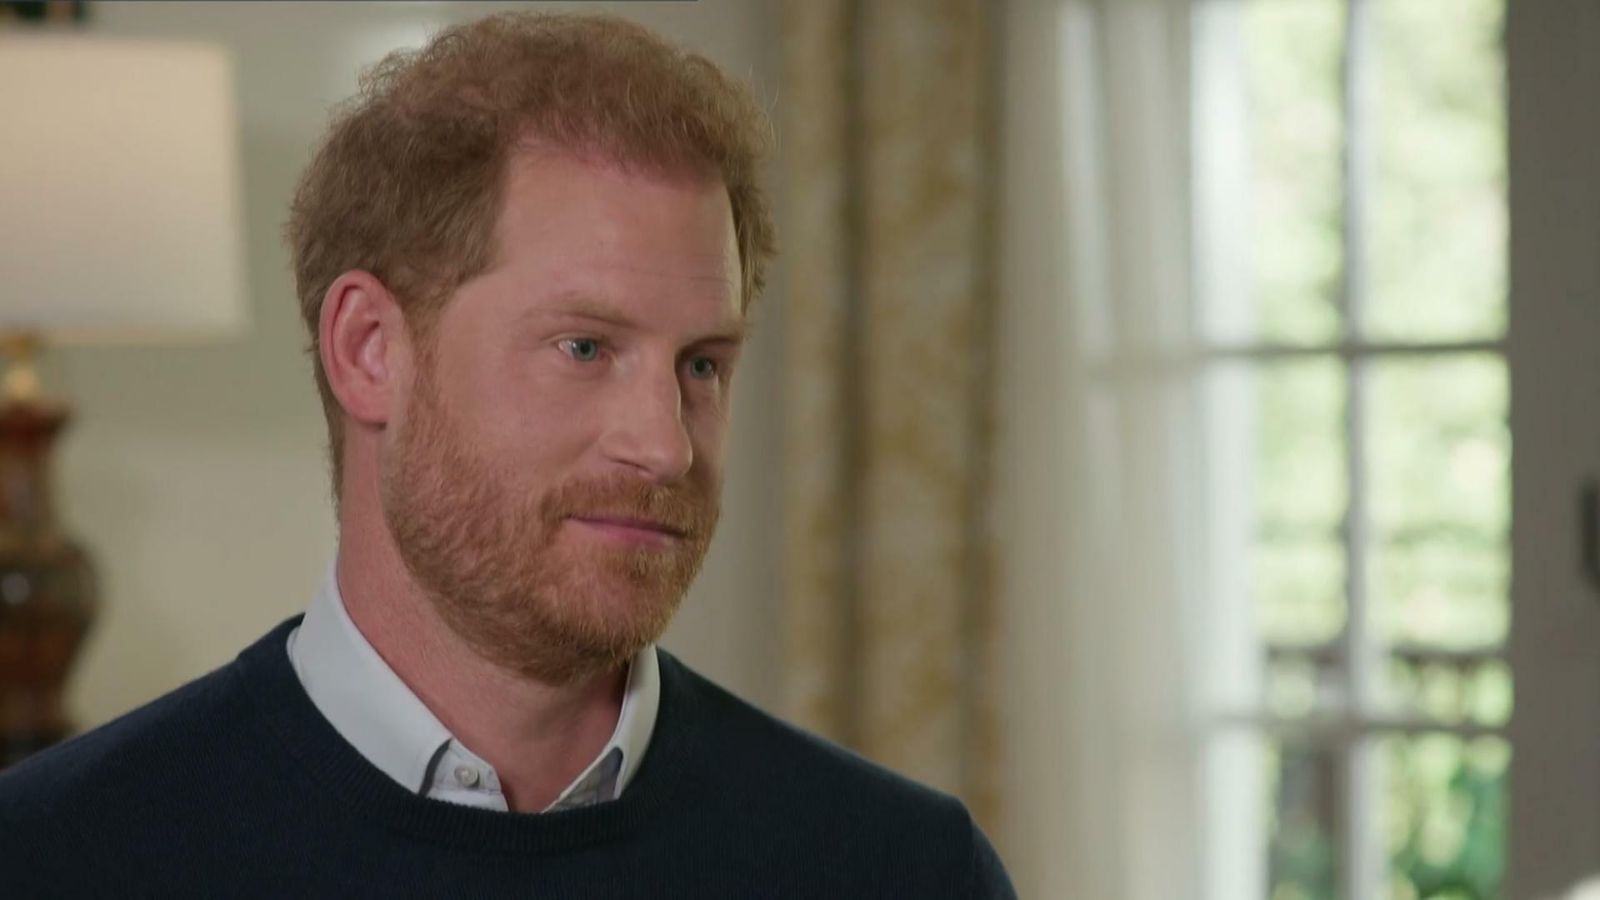 Prince Harry accuses 'certain' Royal Family members of 'getting in bed with the devil' as TV interviews air